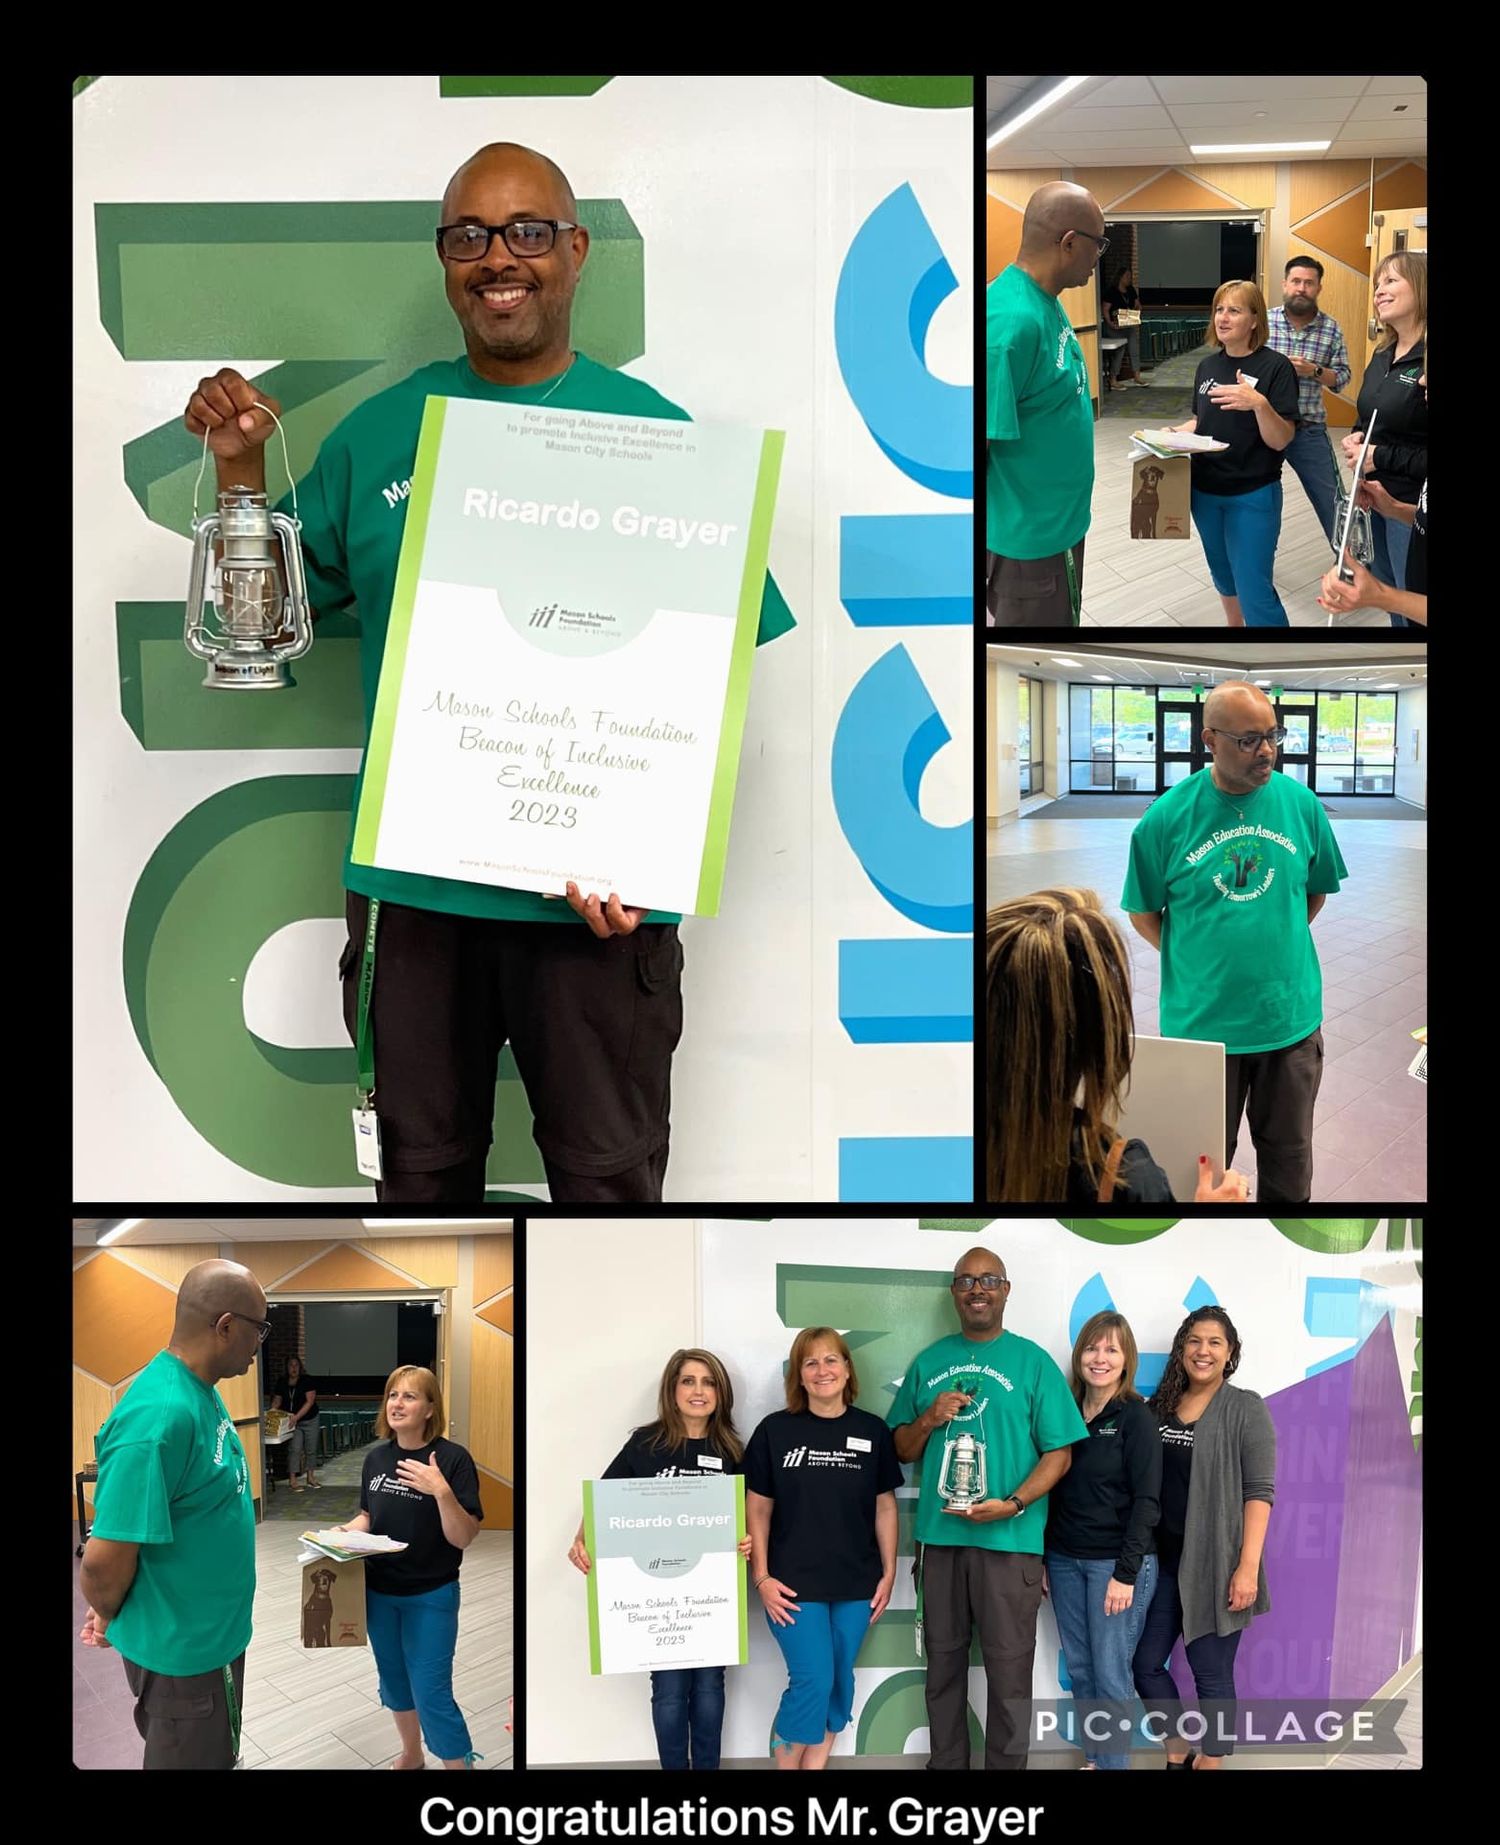 Collage of Ricardo Grayer with his award